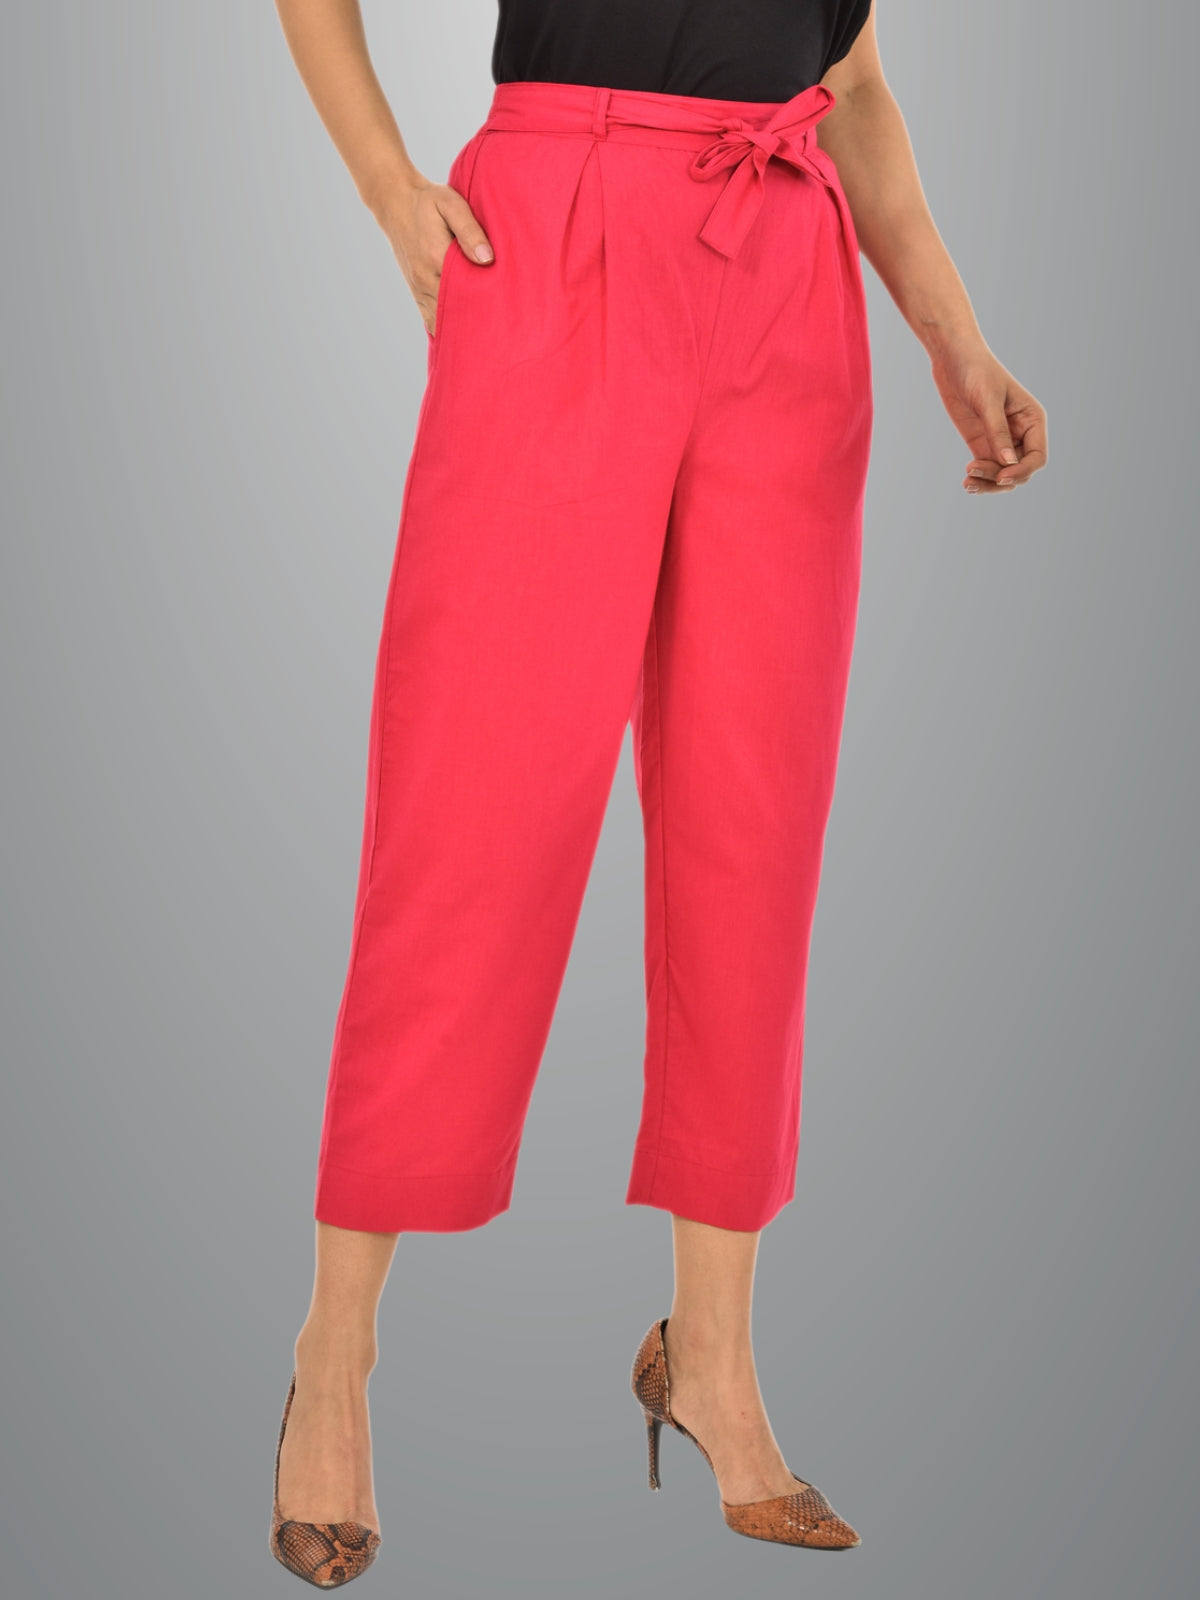 Women Solid Pink Cluottes Trouser